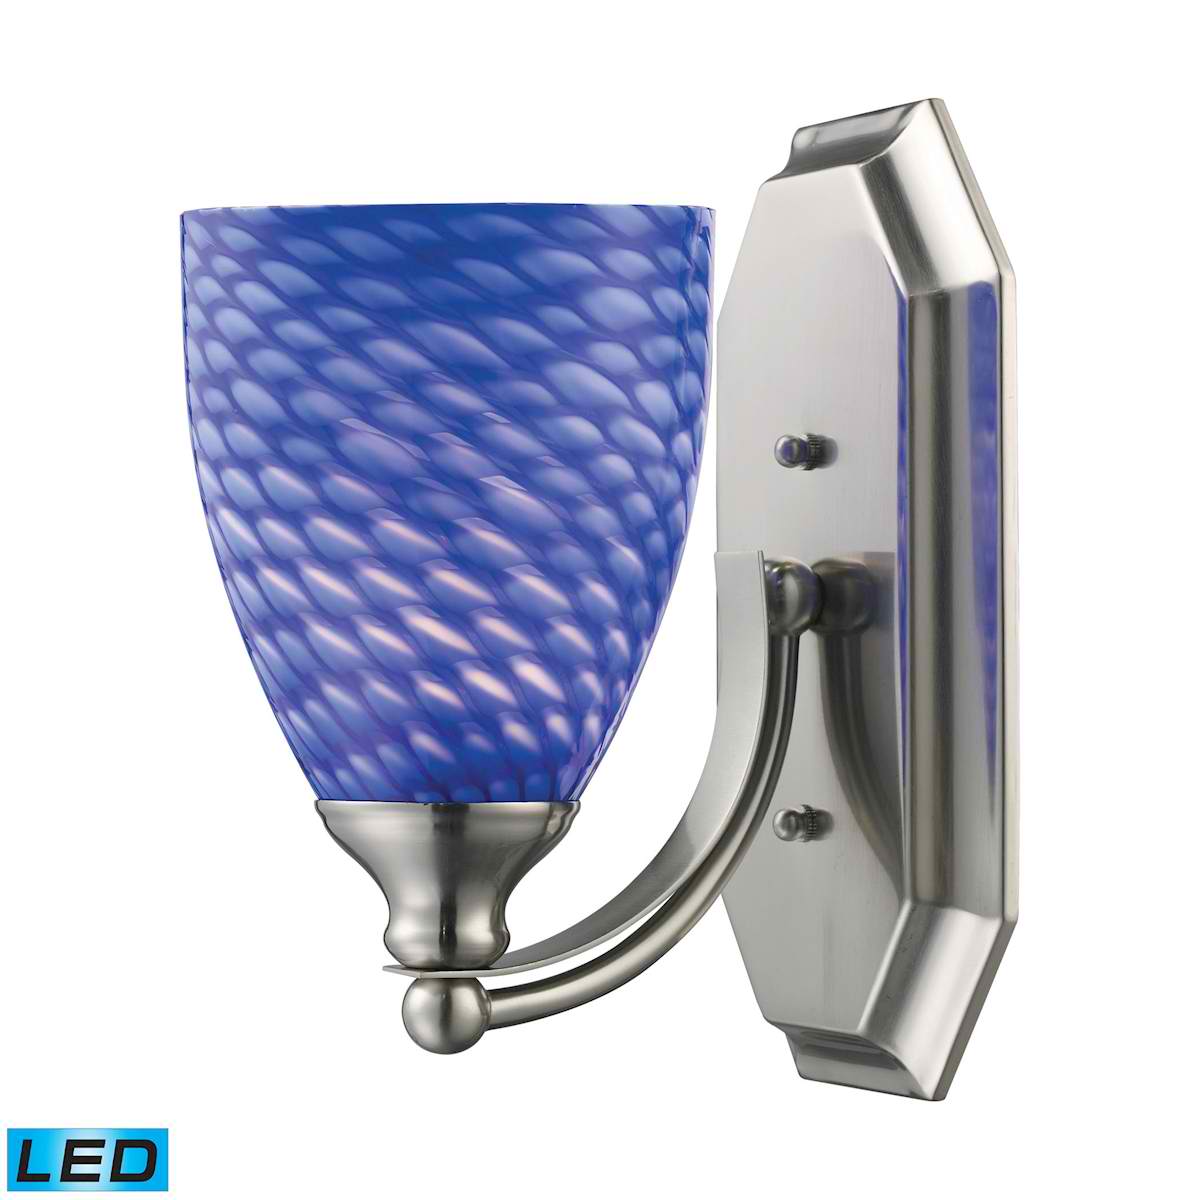 1 Light Vanity in Satin Nickel and Sapphire Glass - LED Offering Up To 800 Lumens (60 Watt Equivalent)